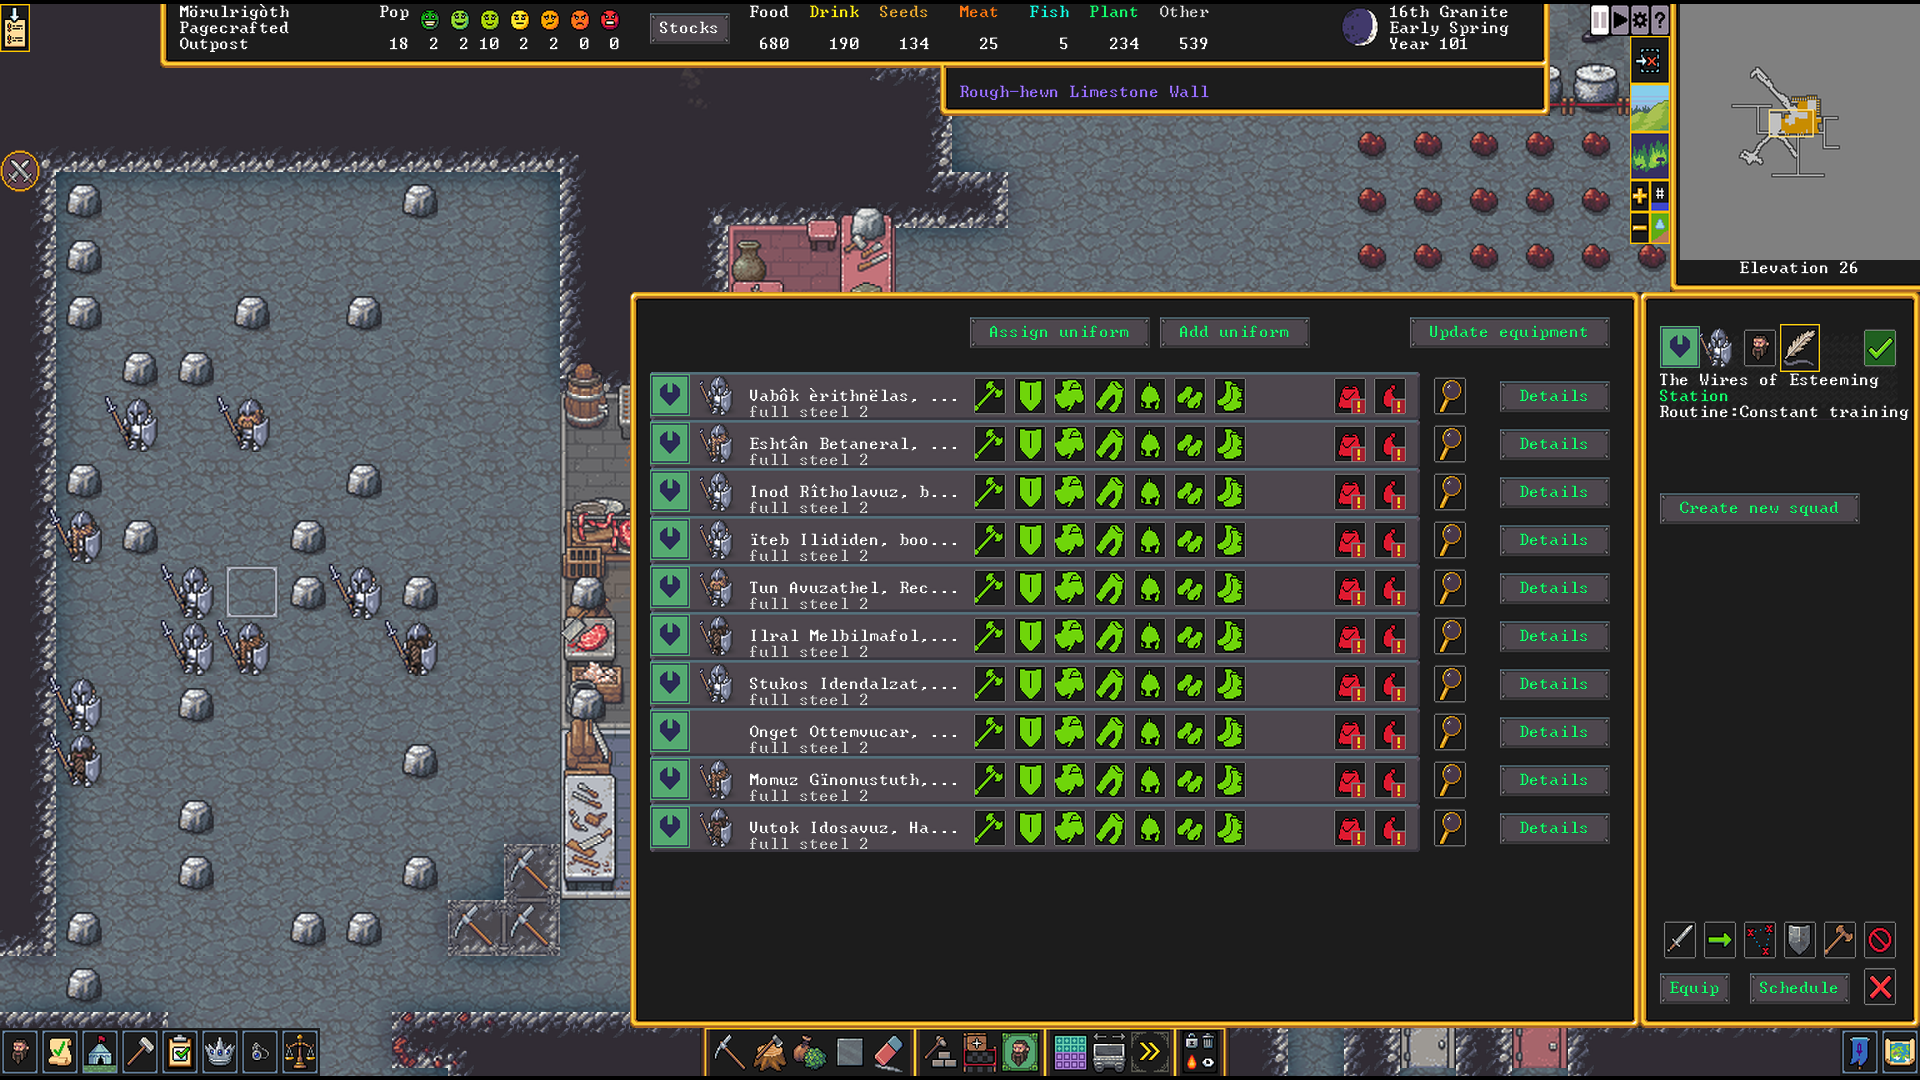 A screenshot of Dwarf Fortress. On the left, 10 Dwarves wearing steel armor and holding steel spears. On the right, the Squad Equipment panel shows all green: the soldiers are wearing the proper weapon, shield, bodywear, legwear, headwear, handwear, and footwear. The date is 16th Granite, Early Spring, Year 101